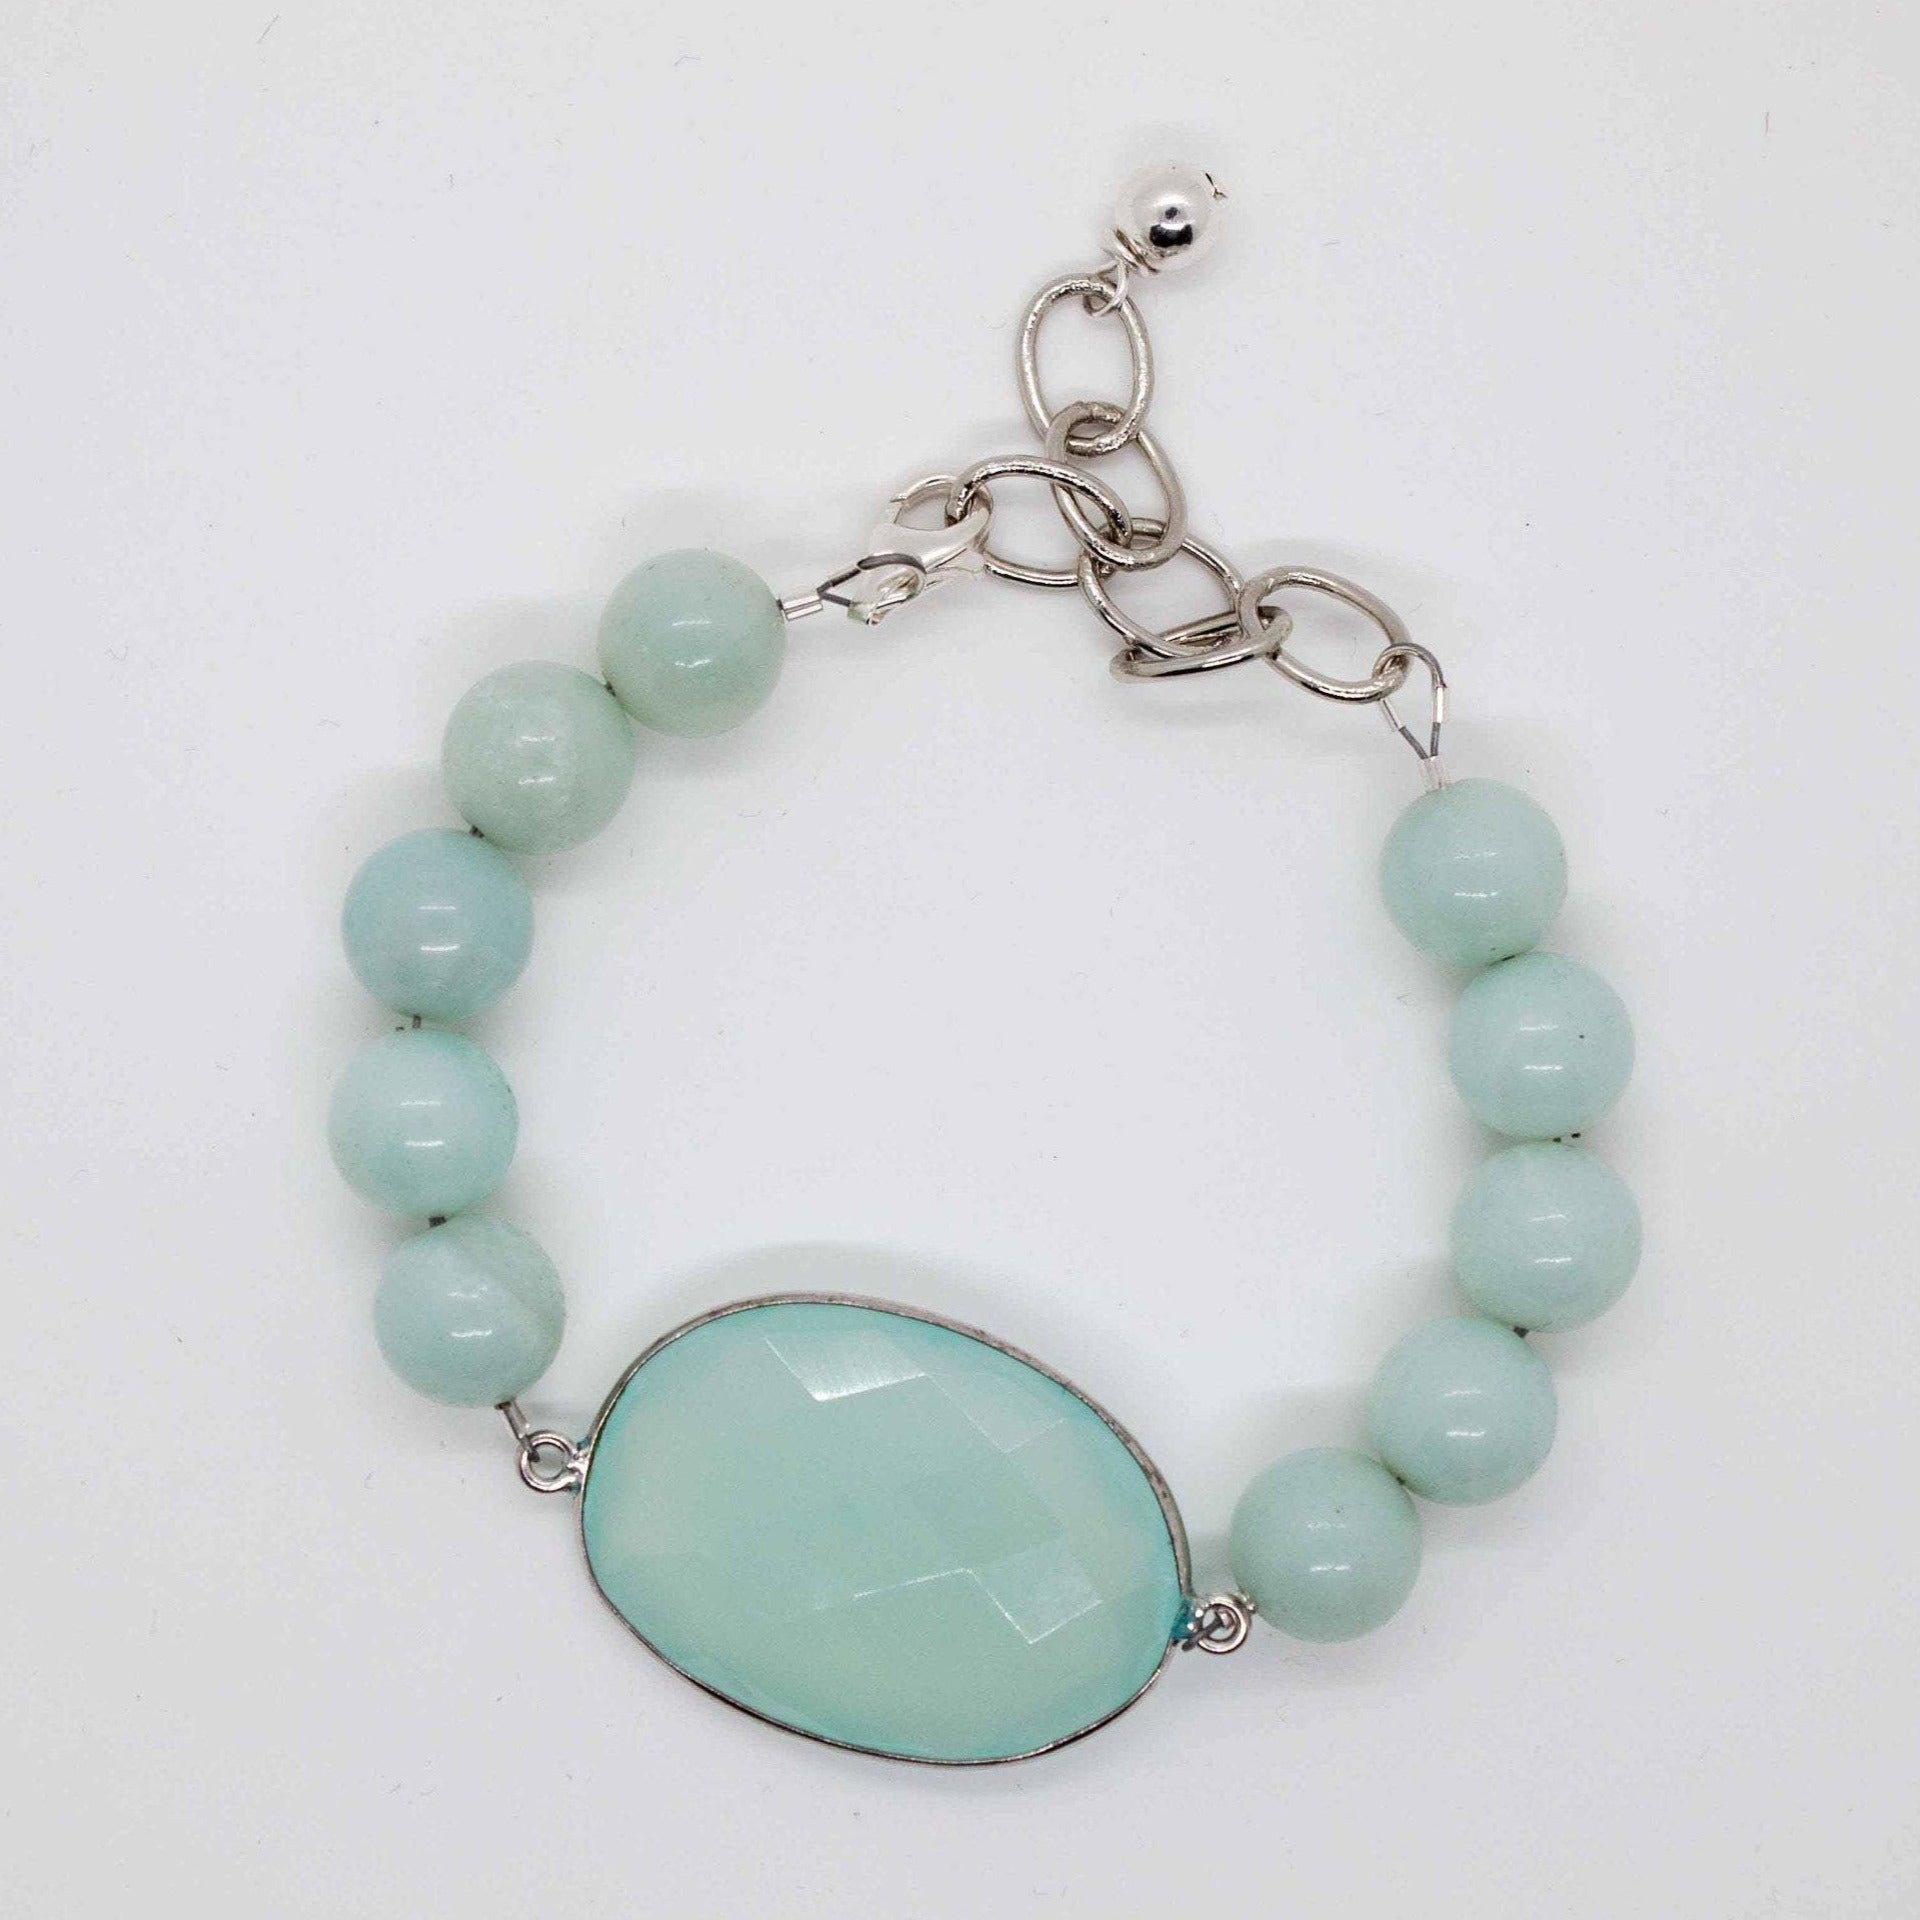 Cadence bracelet stack: 3 beaded bracelets made from crystal, sterling silver and amazonite. Amazonite bracelet has large chalcedony pendant and adjustable sterling silver lobster clasp.